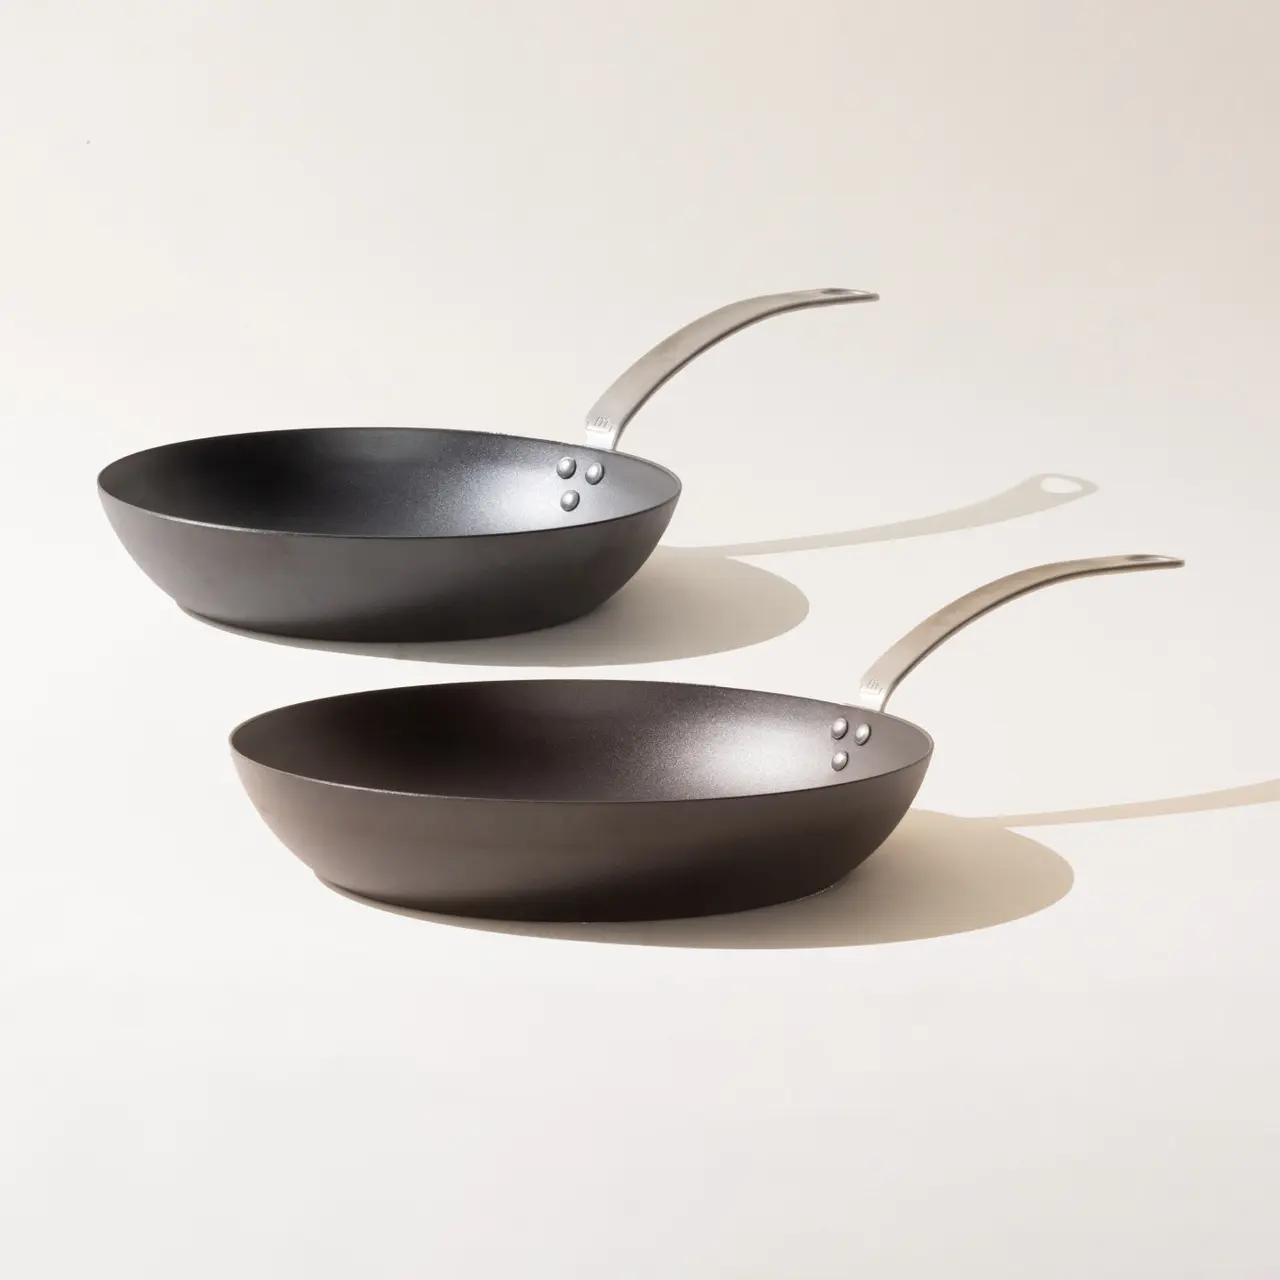 Two black non-stick frying pans with silver handles arranged diagonally on a light background.